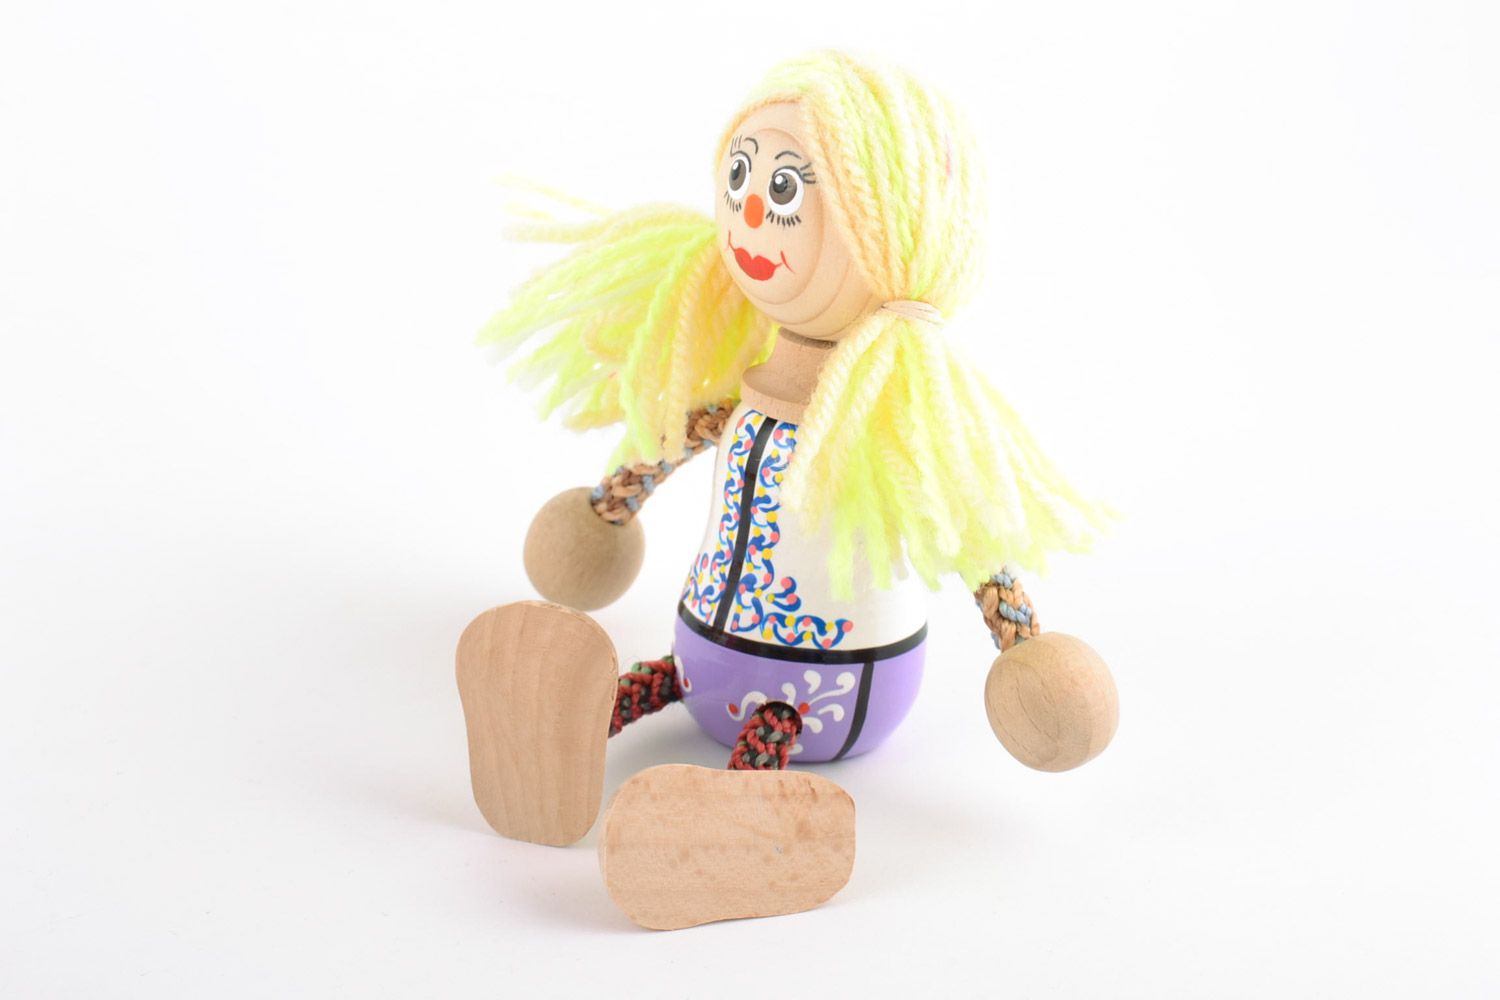 Unusual handmade painted wooden eco toy girl with thread arms and legs photo 4